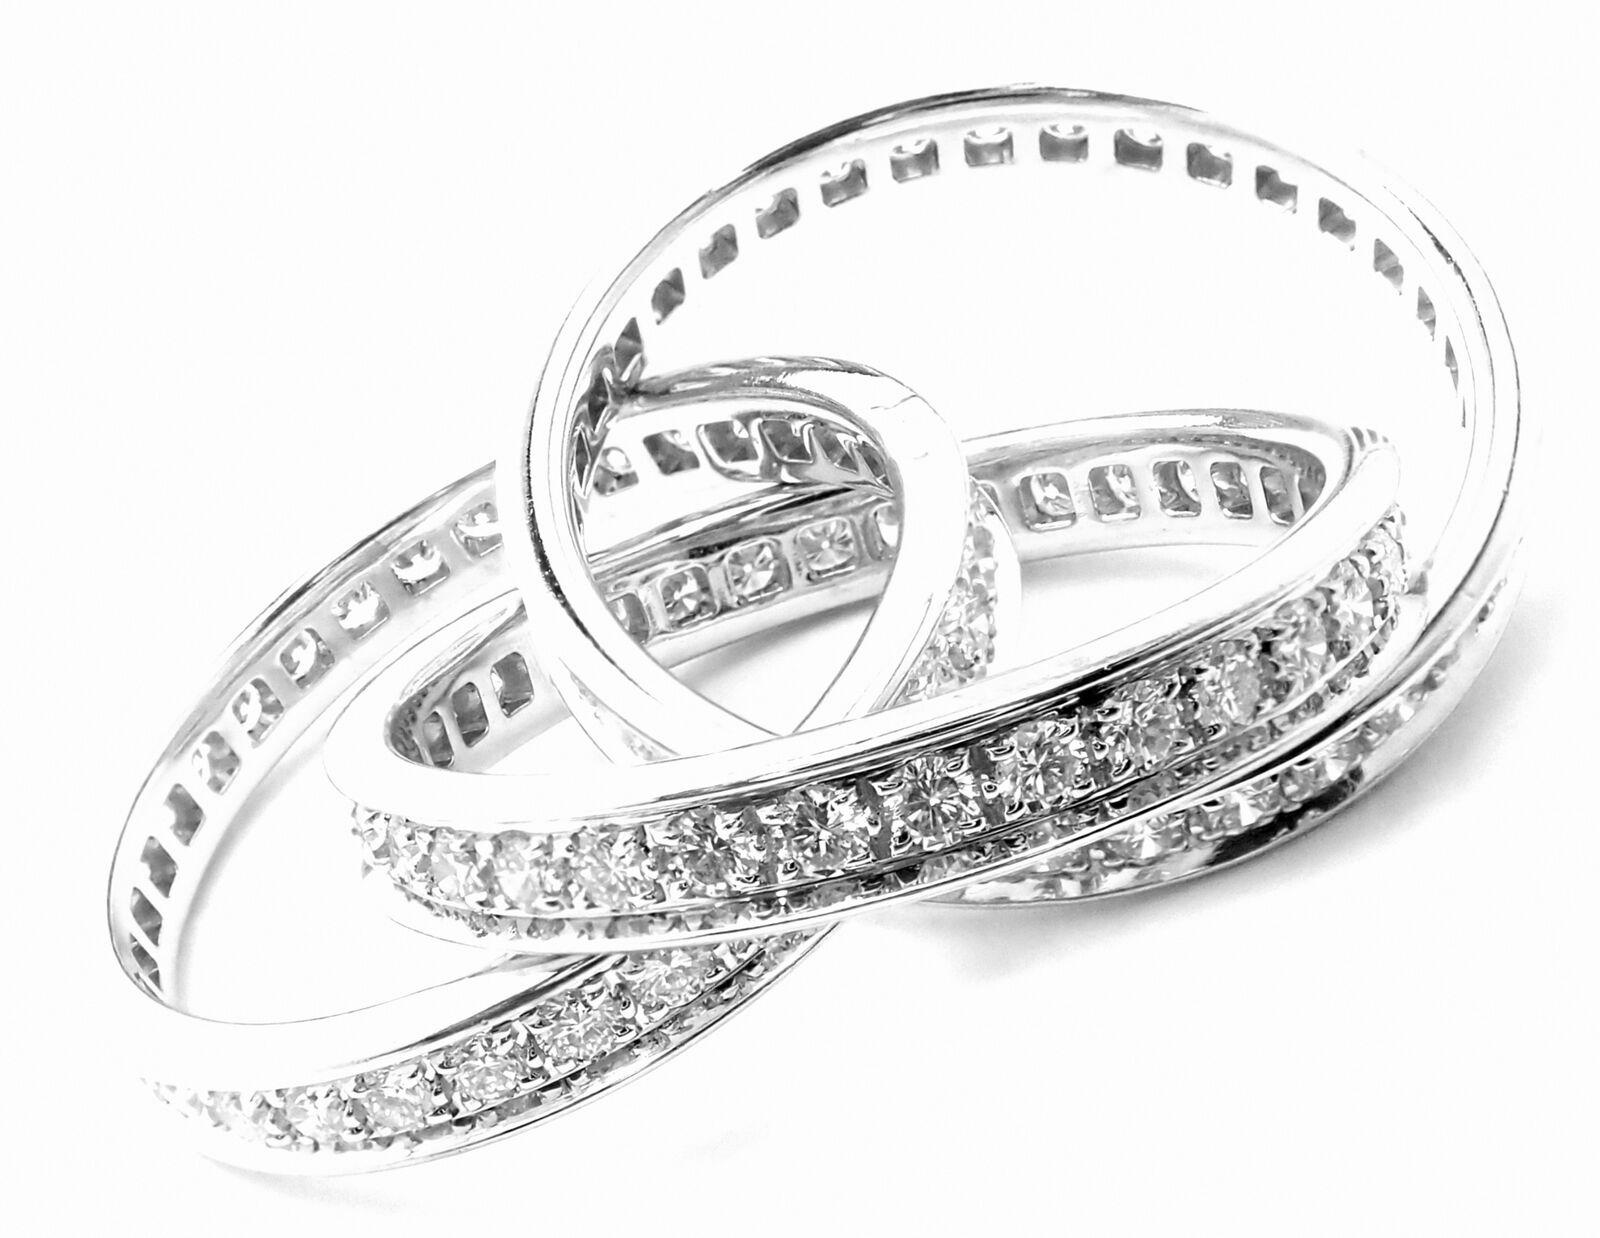 18k White Gold Diamond Trinity Band Ring by Cartier.  
With 96 Round Brilliant cut diamonds VVS1 clarity, F-H color total weight approx. 1.50ct  
This ring comes with Cartier box.  
Details:  
Size: European 53 US 6 1/4
Weight: 10.3 grams  
Width: